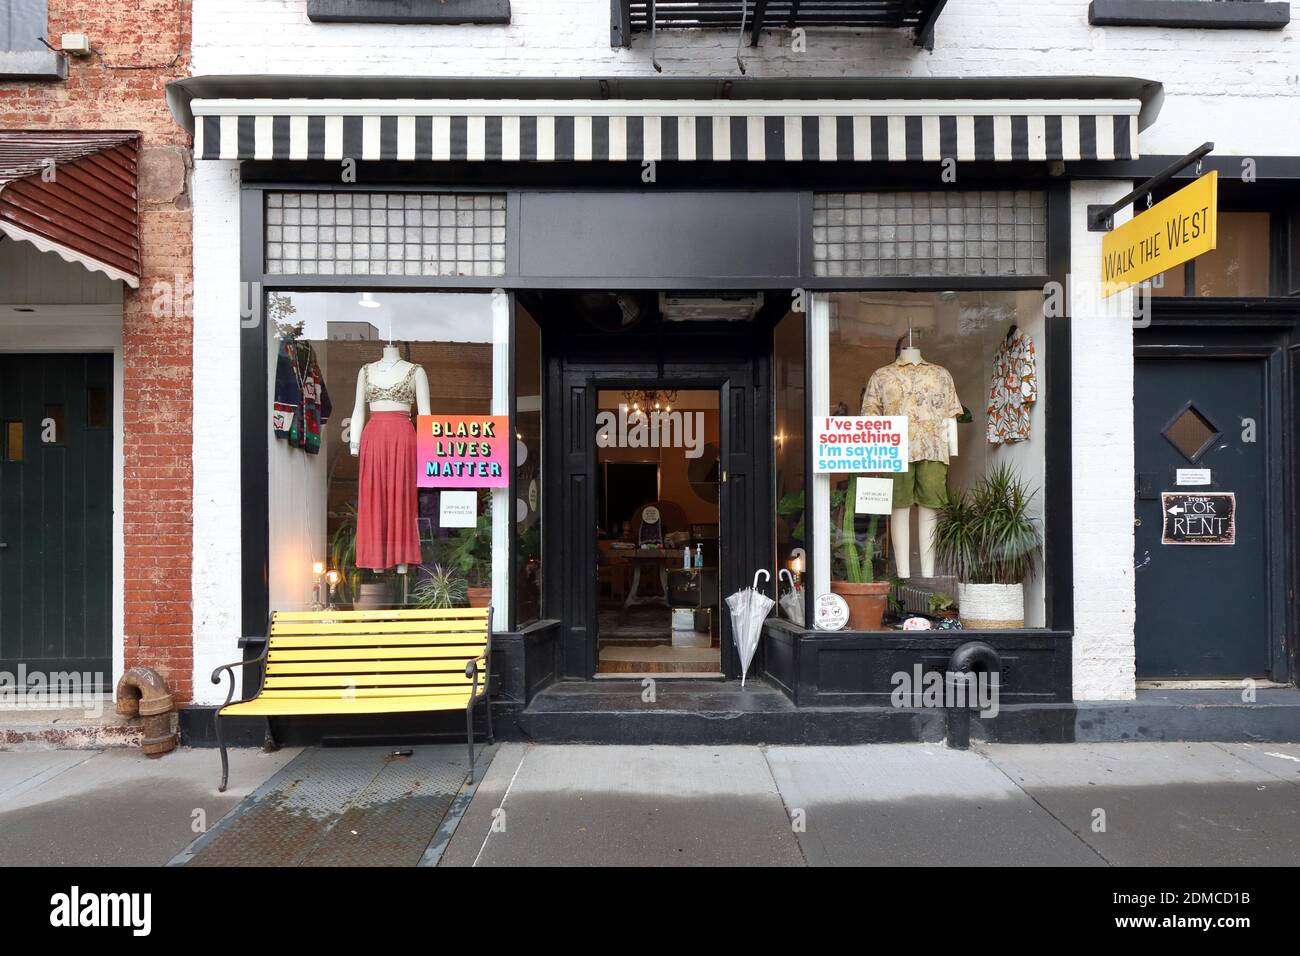 [historical storefront] Walk The West, 150 Franklin St, Brooklyn, New York. NYC storefront photo of a vintage clothing store in the Greenpoint neighbo Stock Photo